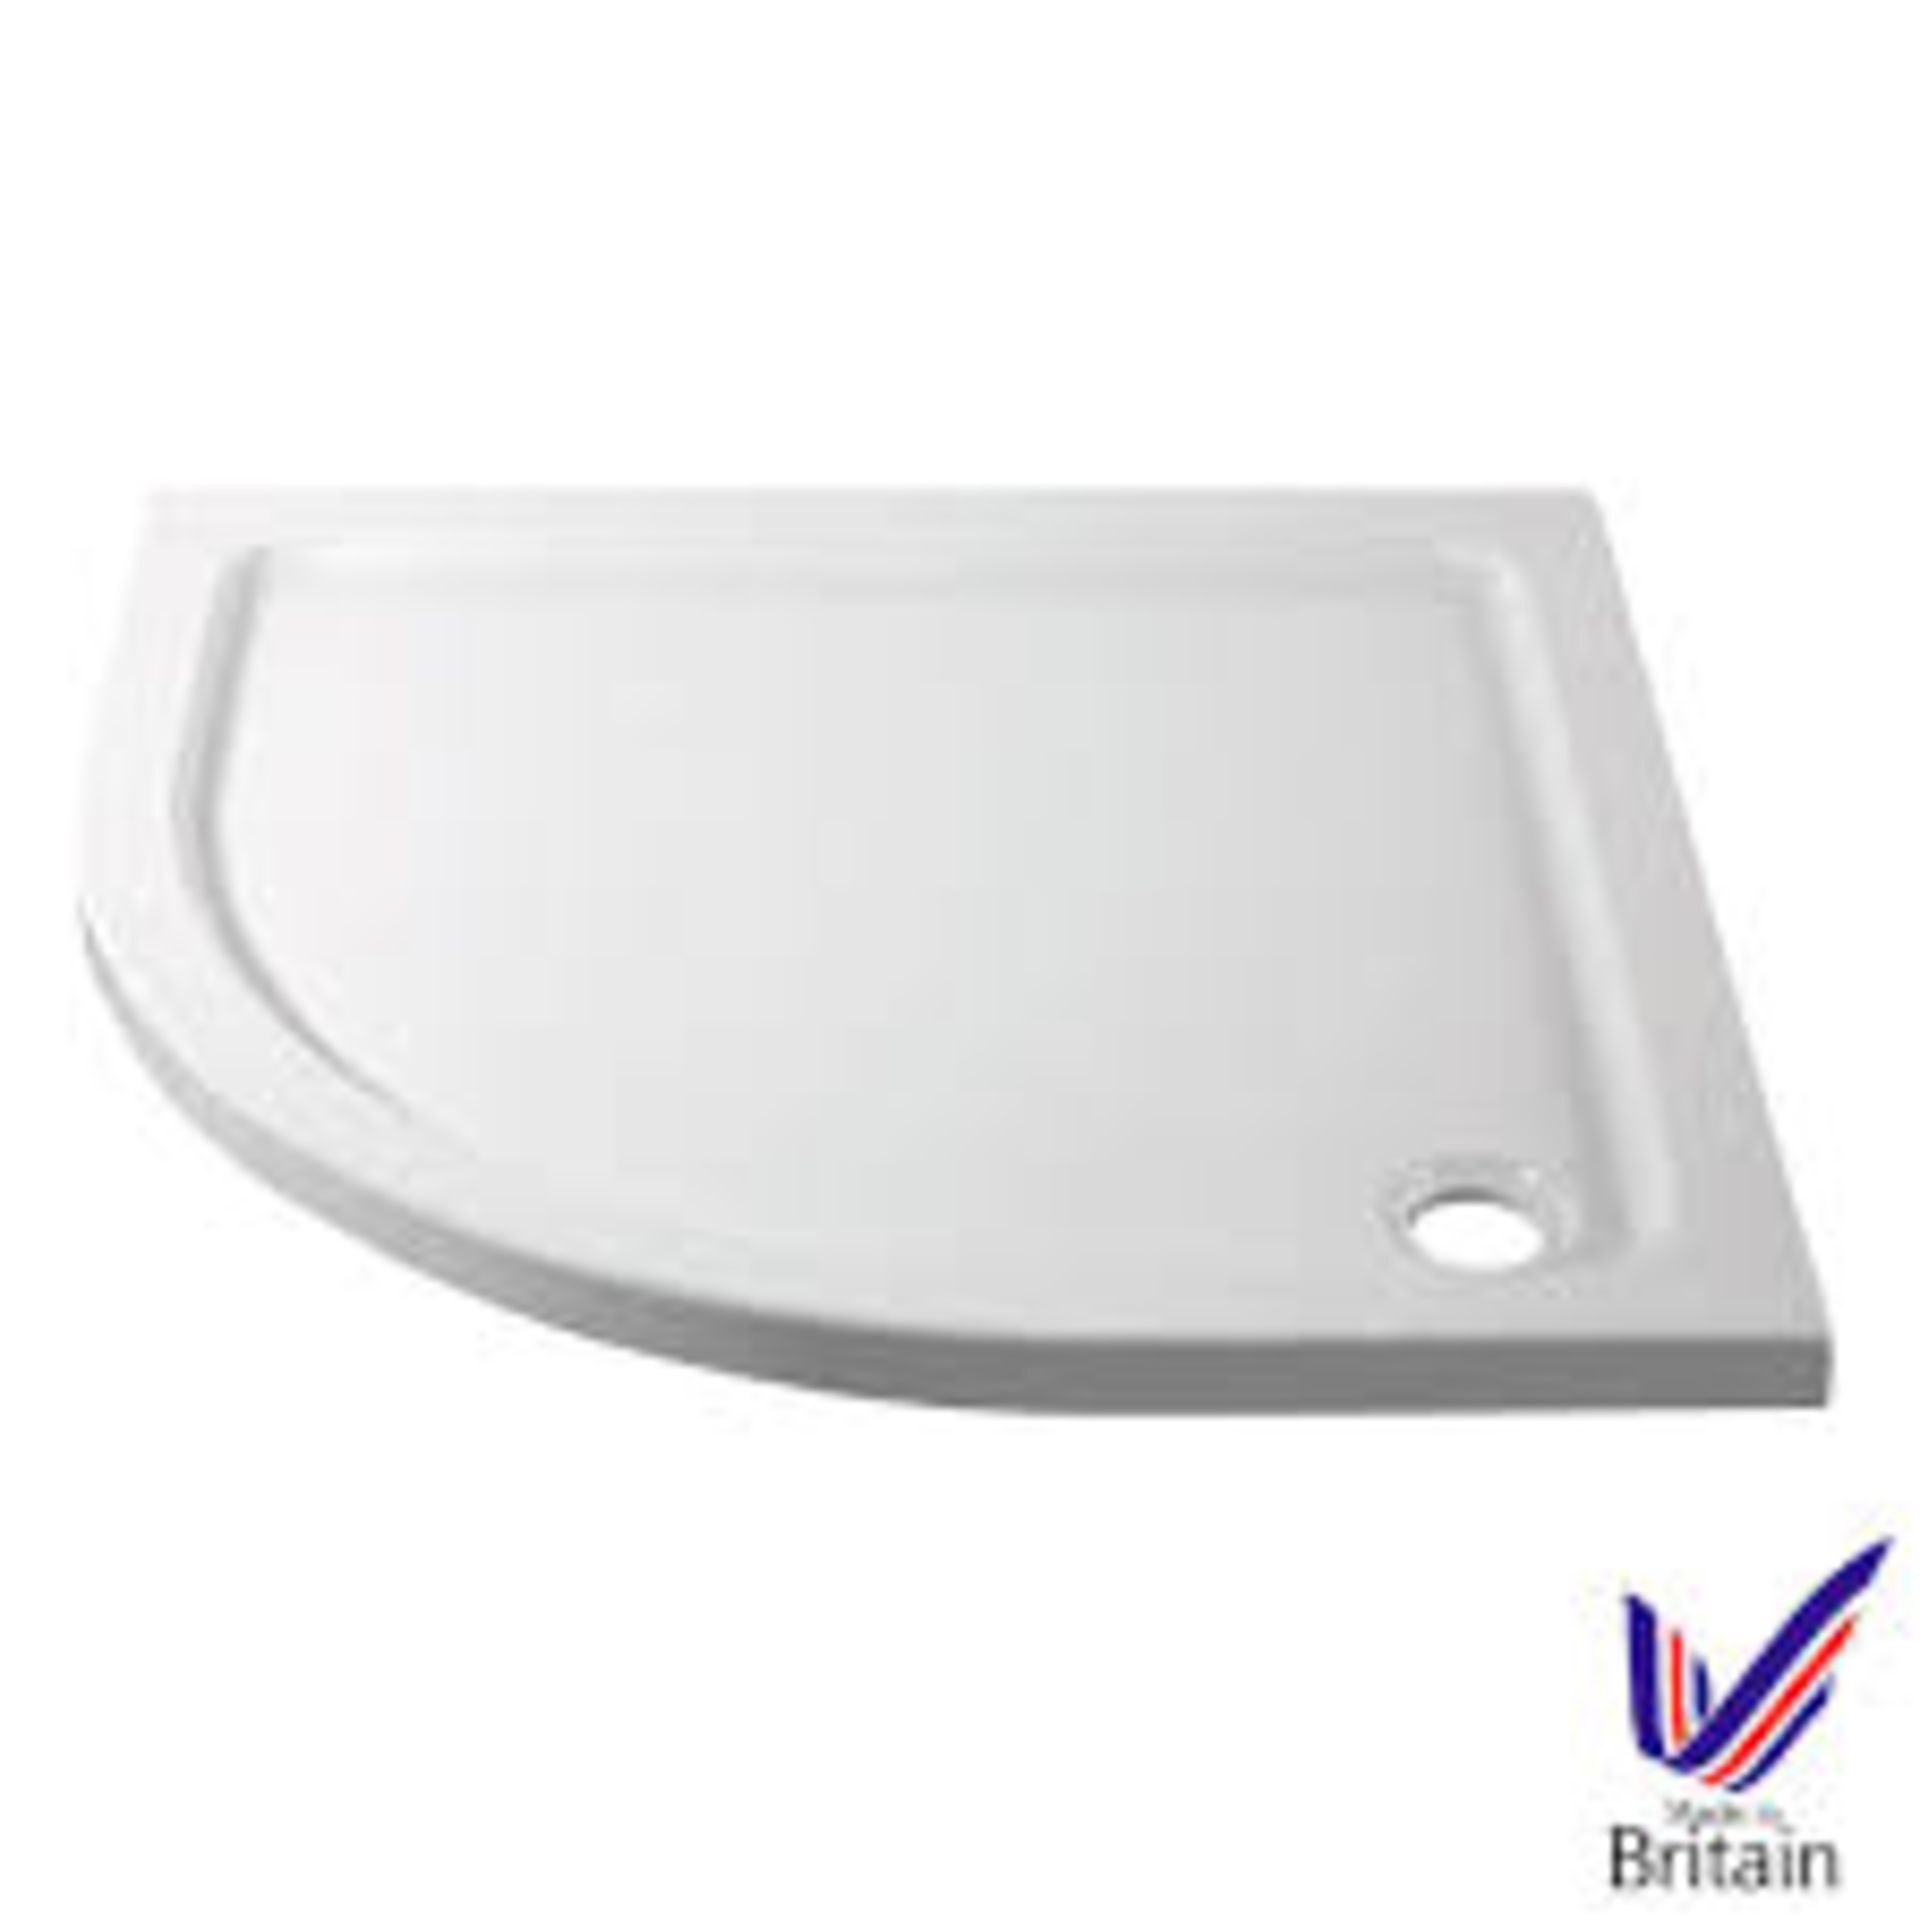 5 X NEW BOXED 800X800 CASELLIE SHOWER TRAYS. RRP £200 EACH. ROW 18